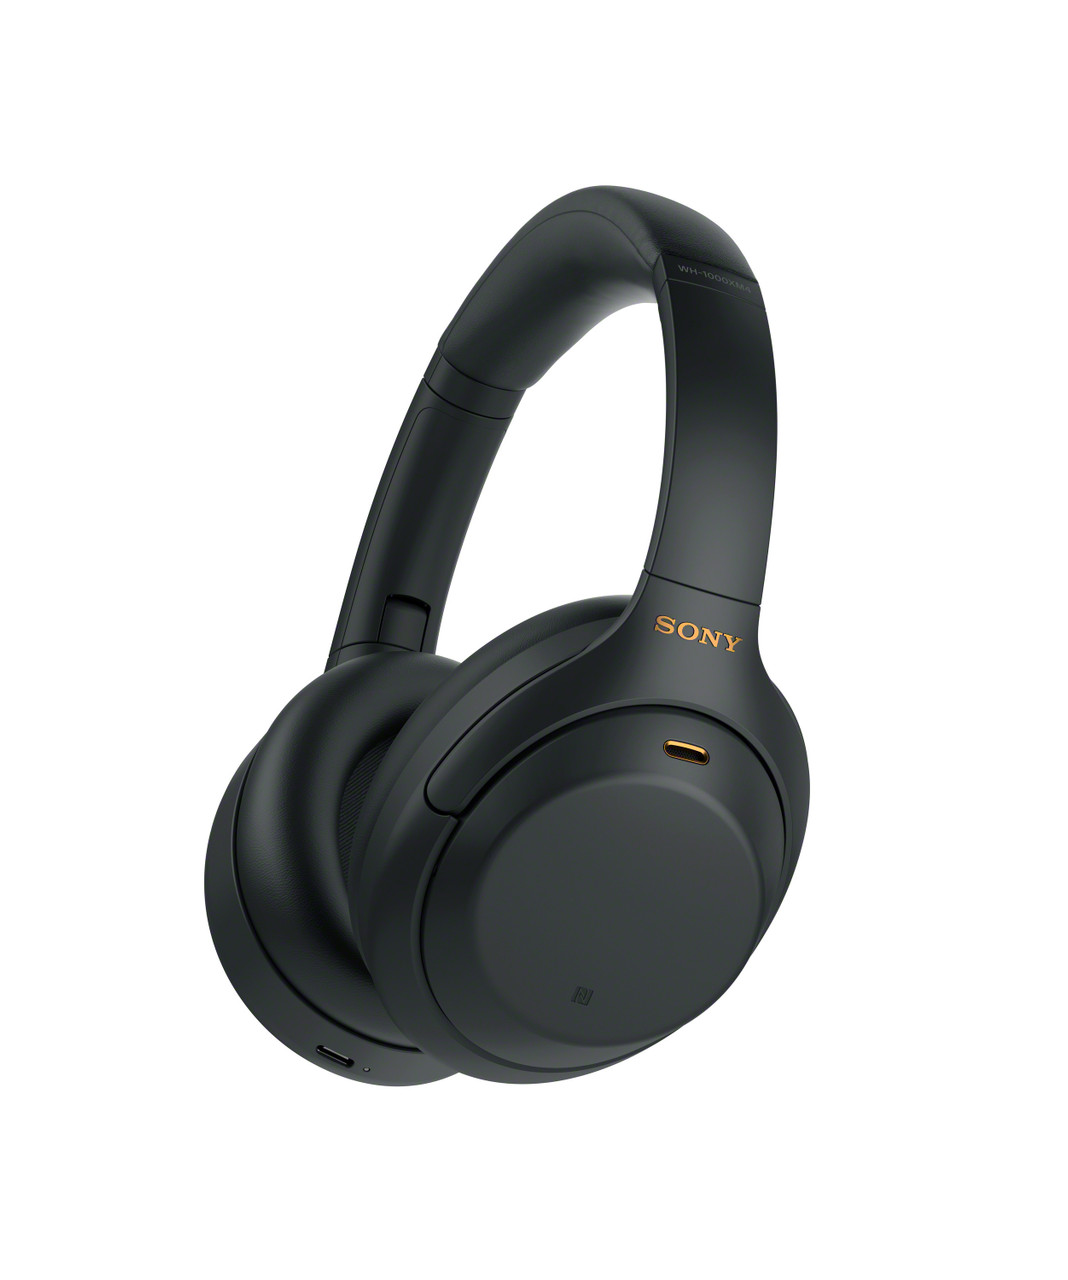 Sony WH-1000XM4 Wireless NC Over the Ear Headphones (Refurb, Black) $144 + Free Shipping